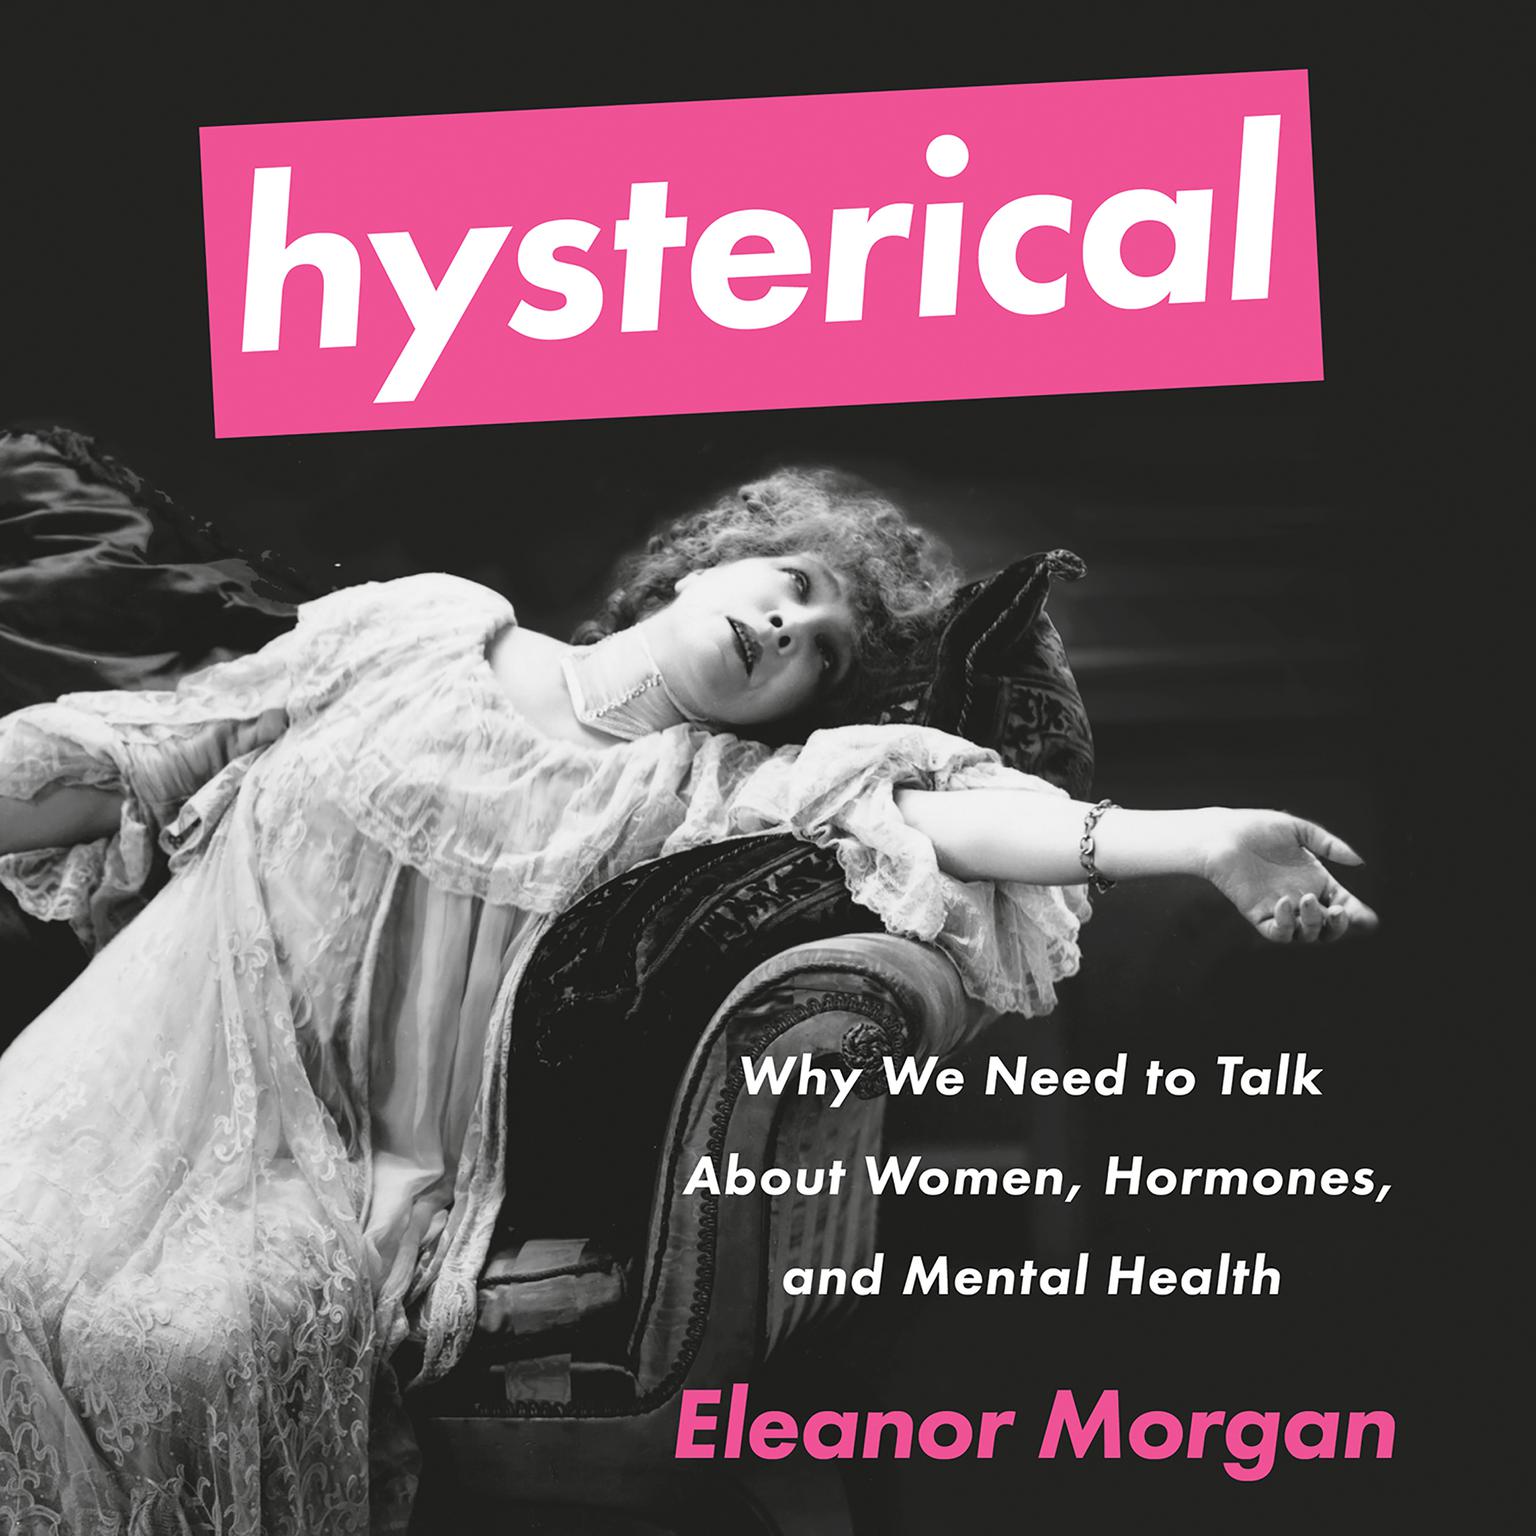 Hysterical: Why We Need to Talk About Women, Hormones, and Mental Health Audiobook, by Eleanor Morgan